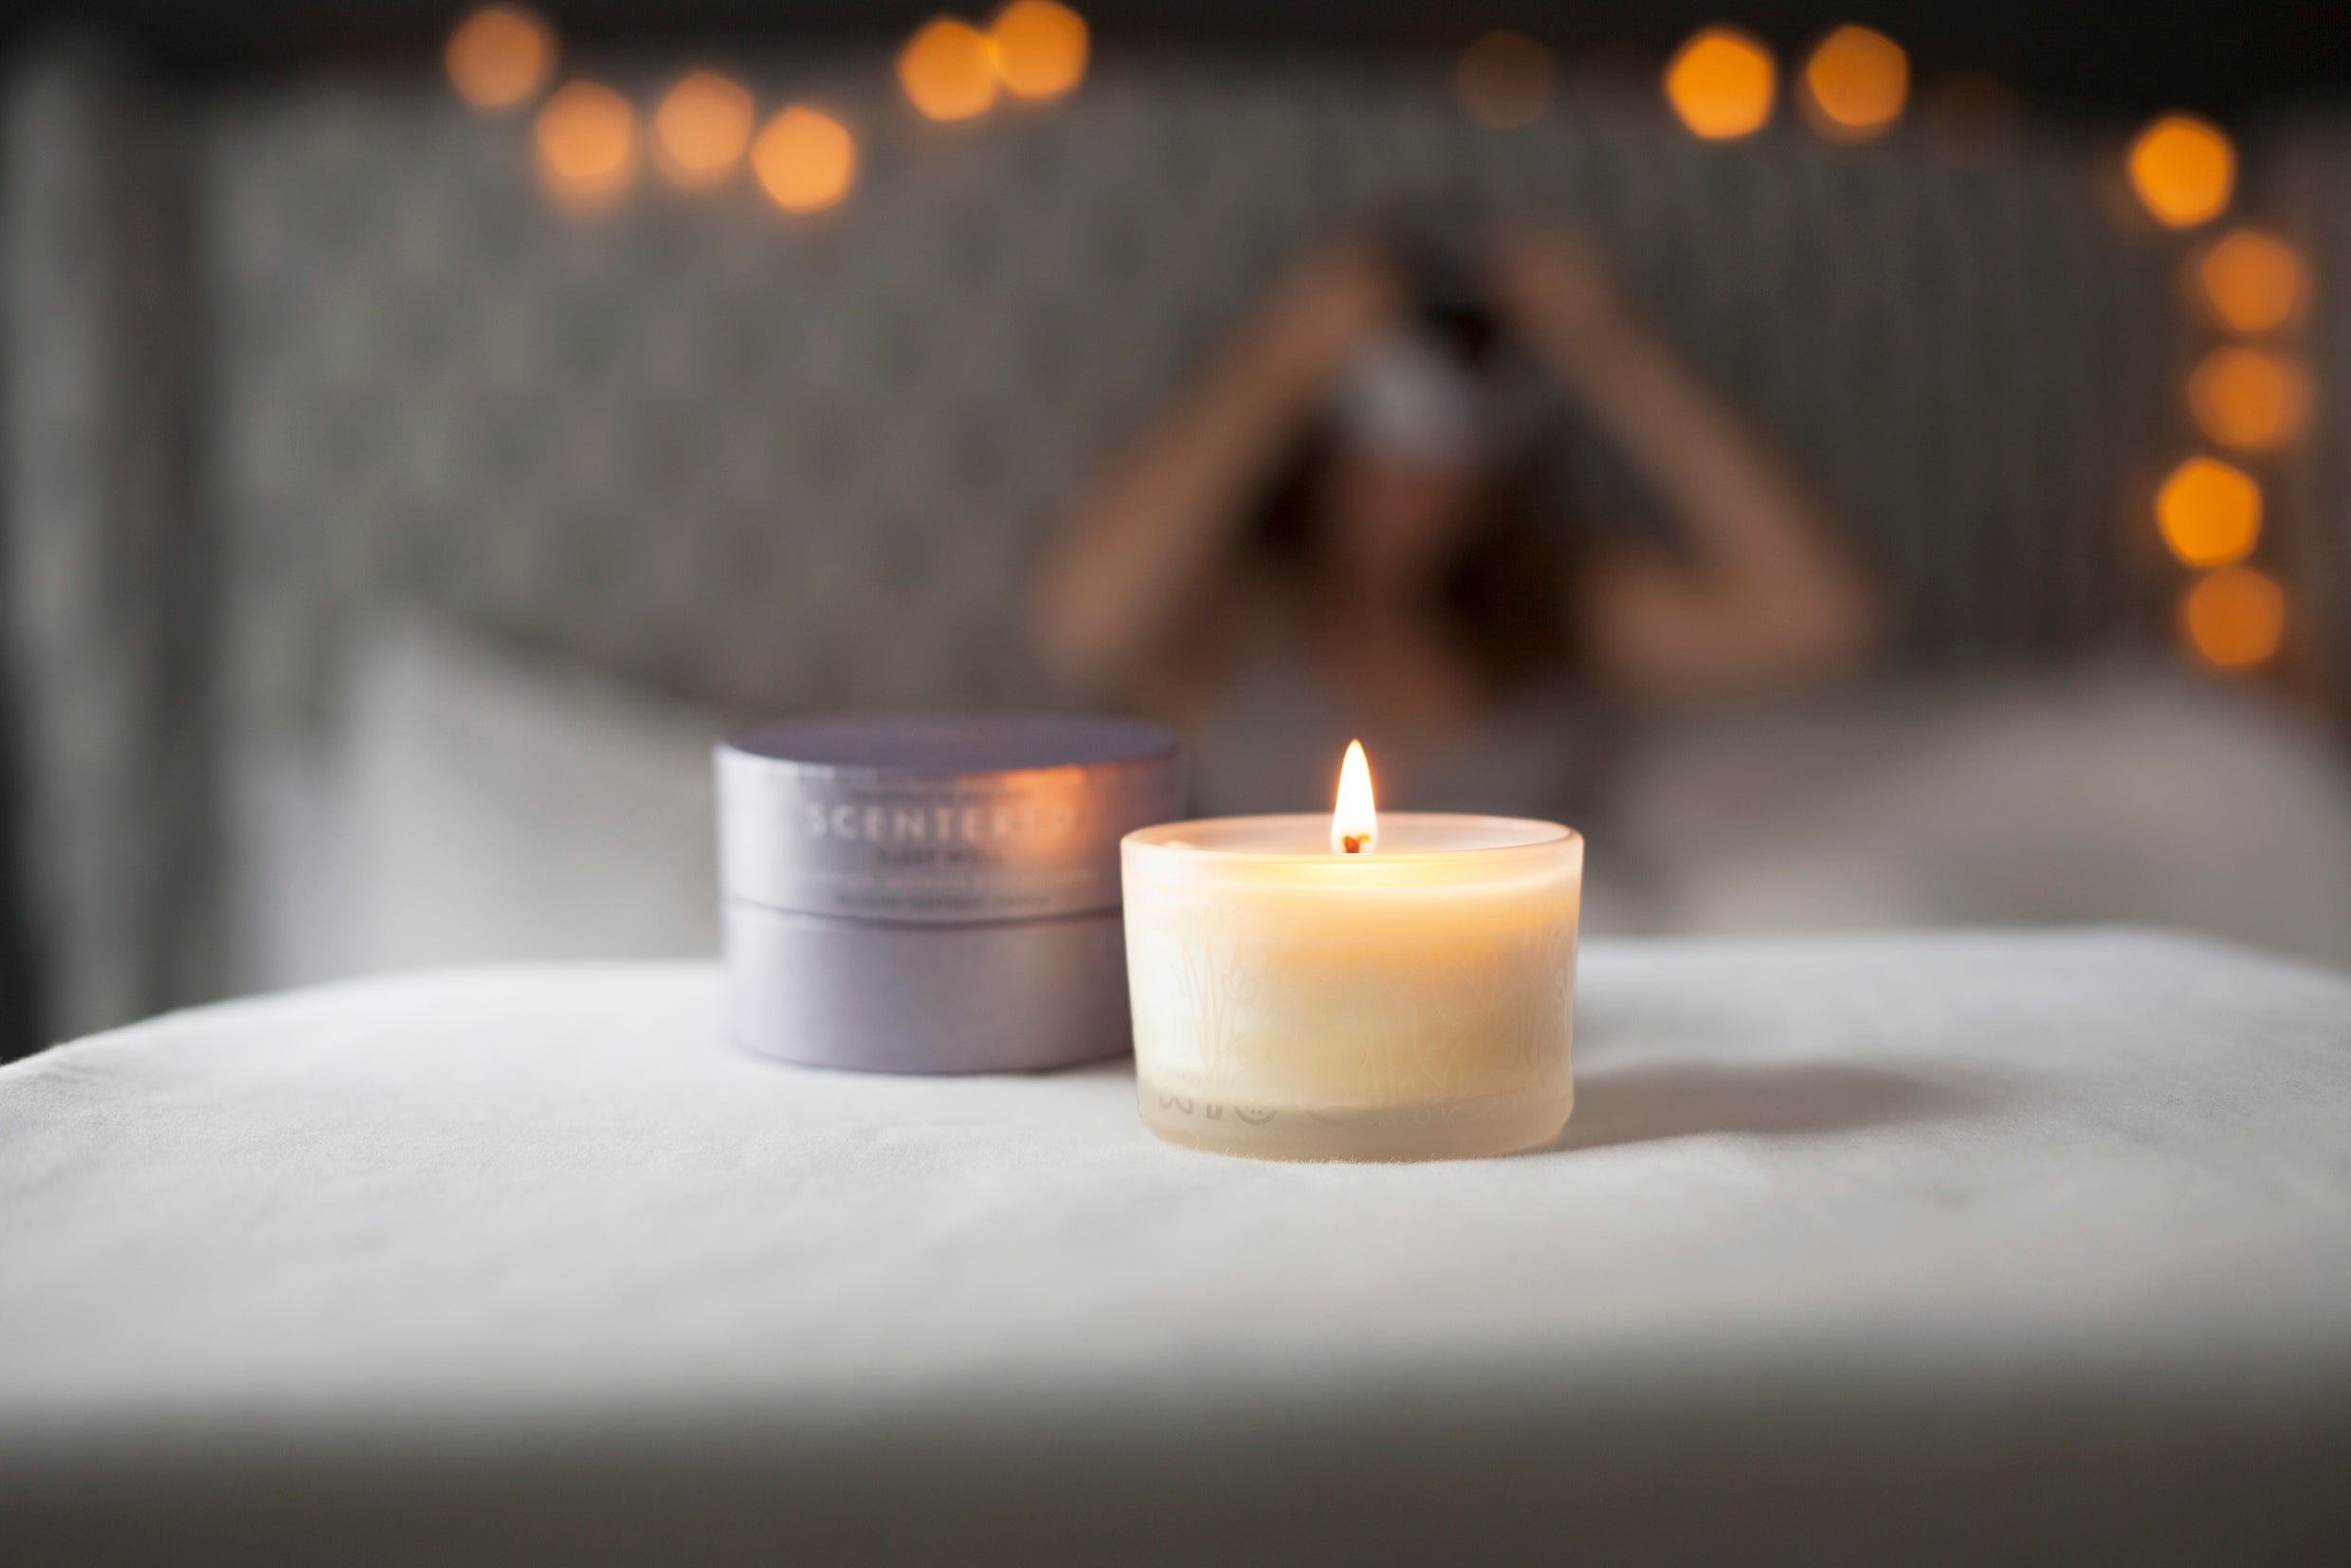 INTRODUCING OUR SLEEP WELL CANDLES